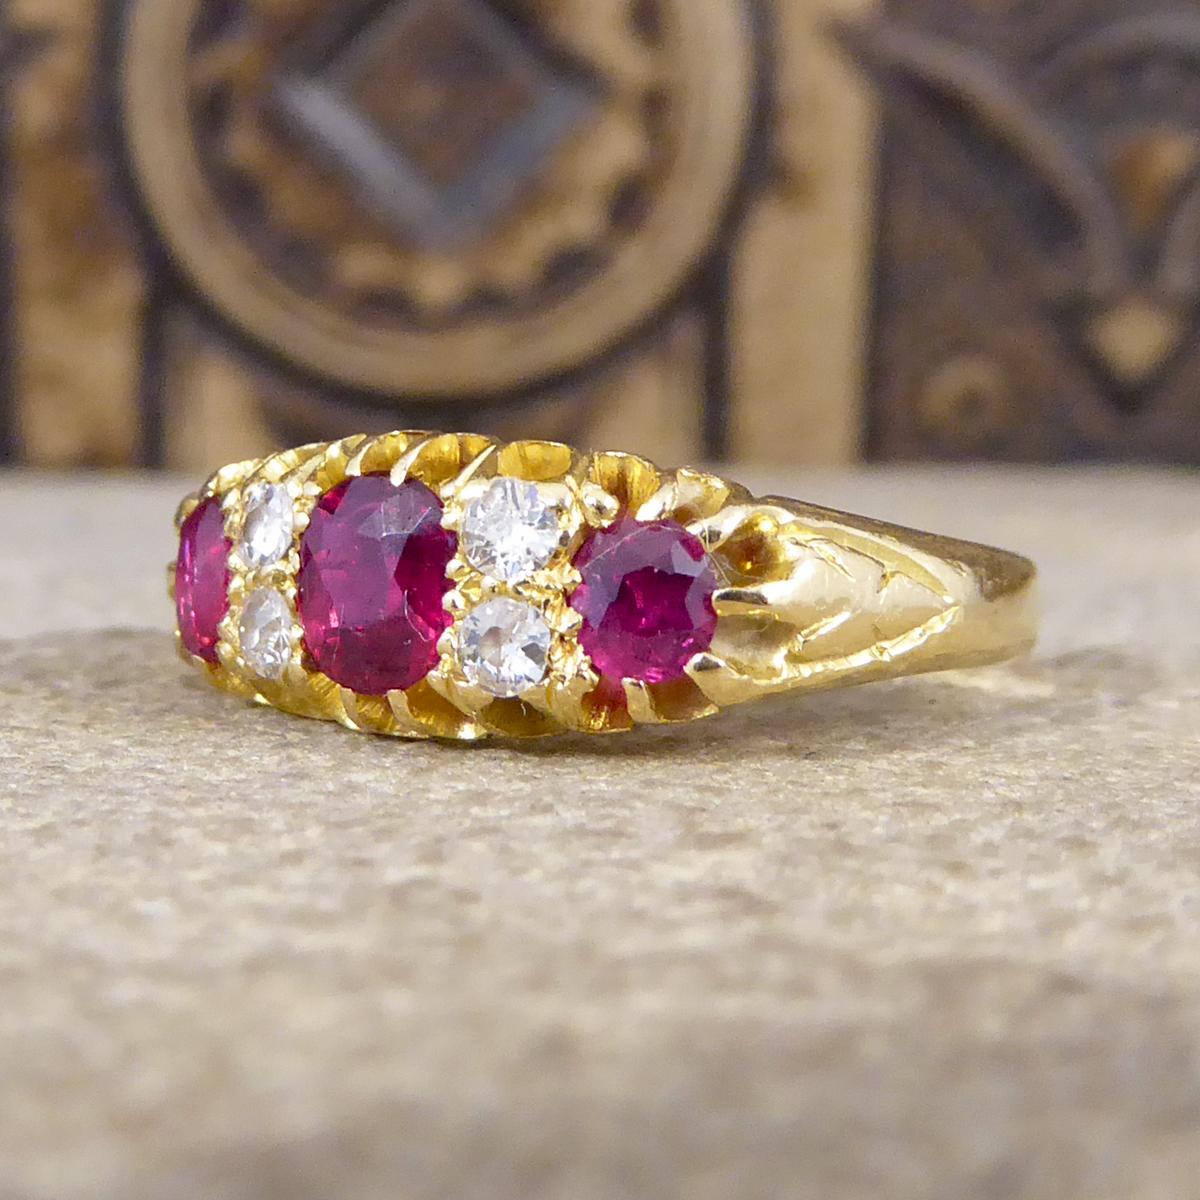 Women's or Men's Edwardian Vibrant Colored Ruby and Diamond Ring in 18 Carat Yellow Gold